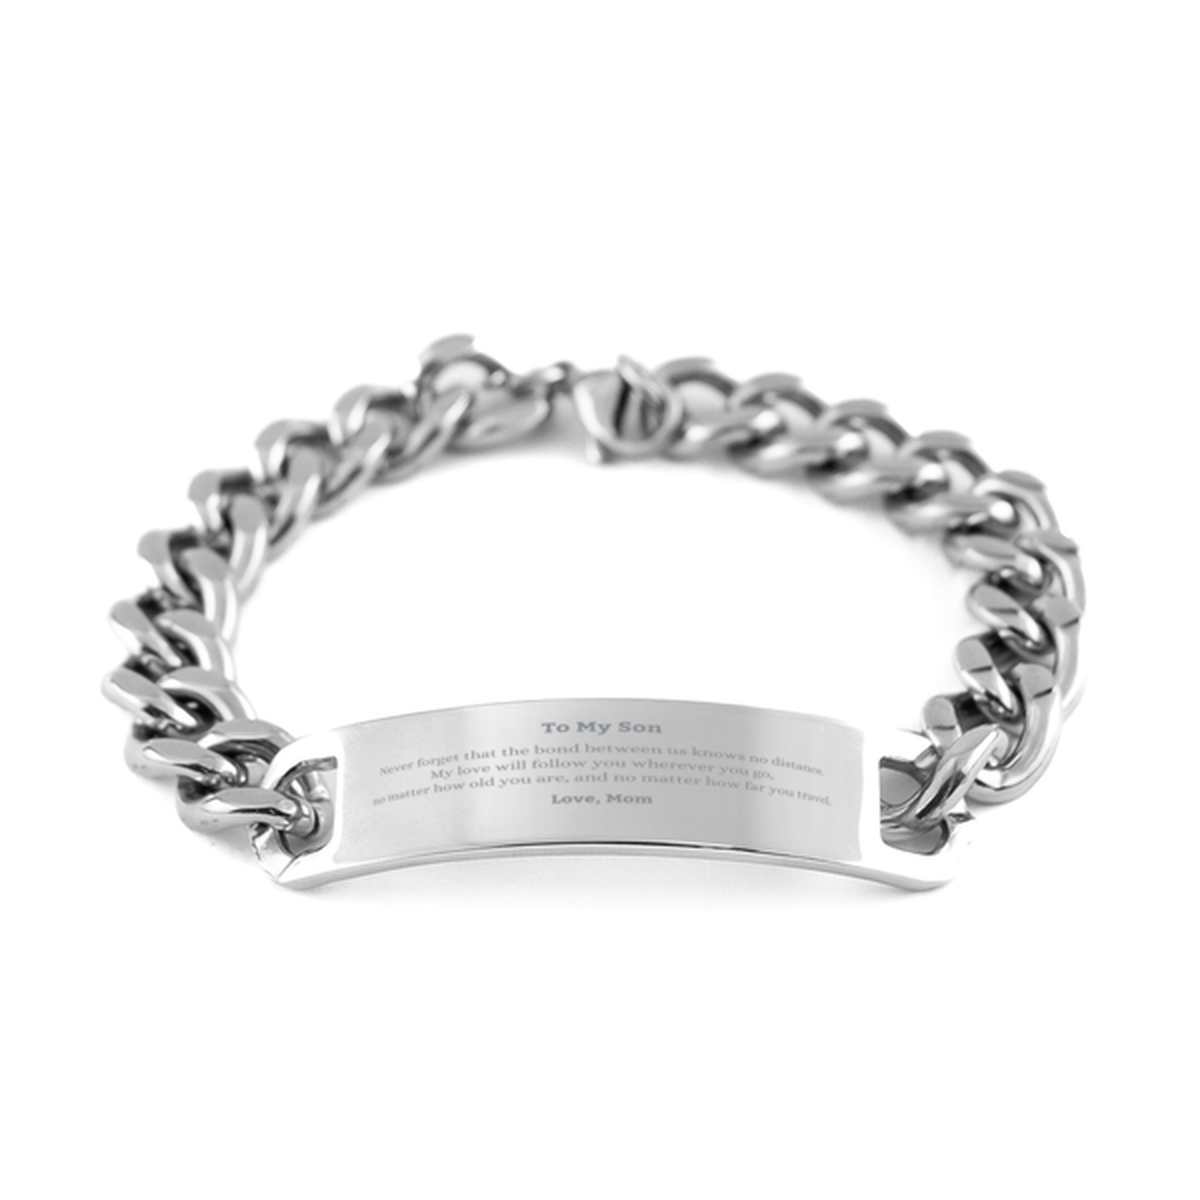 Son Birthday Gifts from Mom, Adjustable Cuban Chain Stainless Steel Bracelet for Son Christmas Graduation Unique Gifts Son Never forget that the bond between us knows no distance. Love, Mom